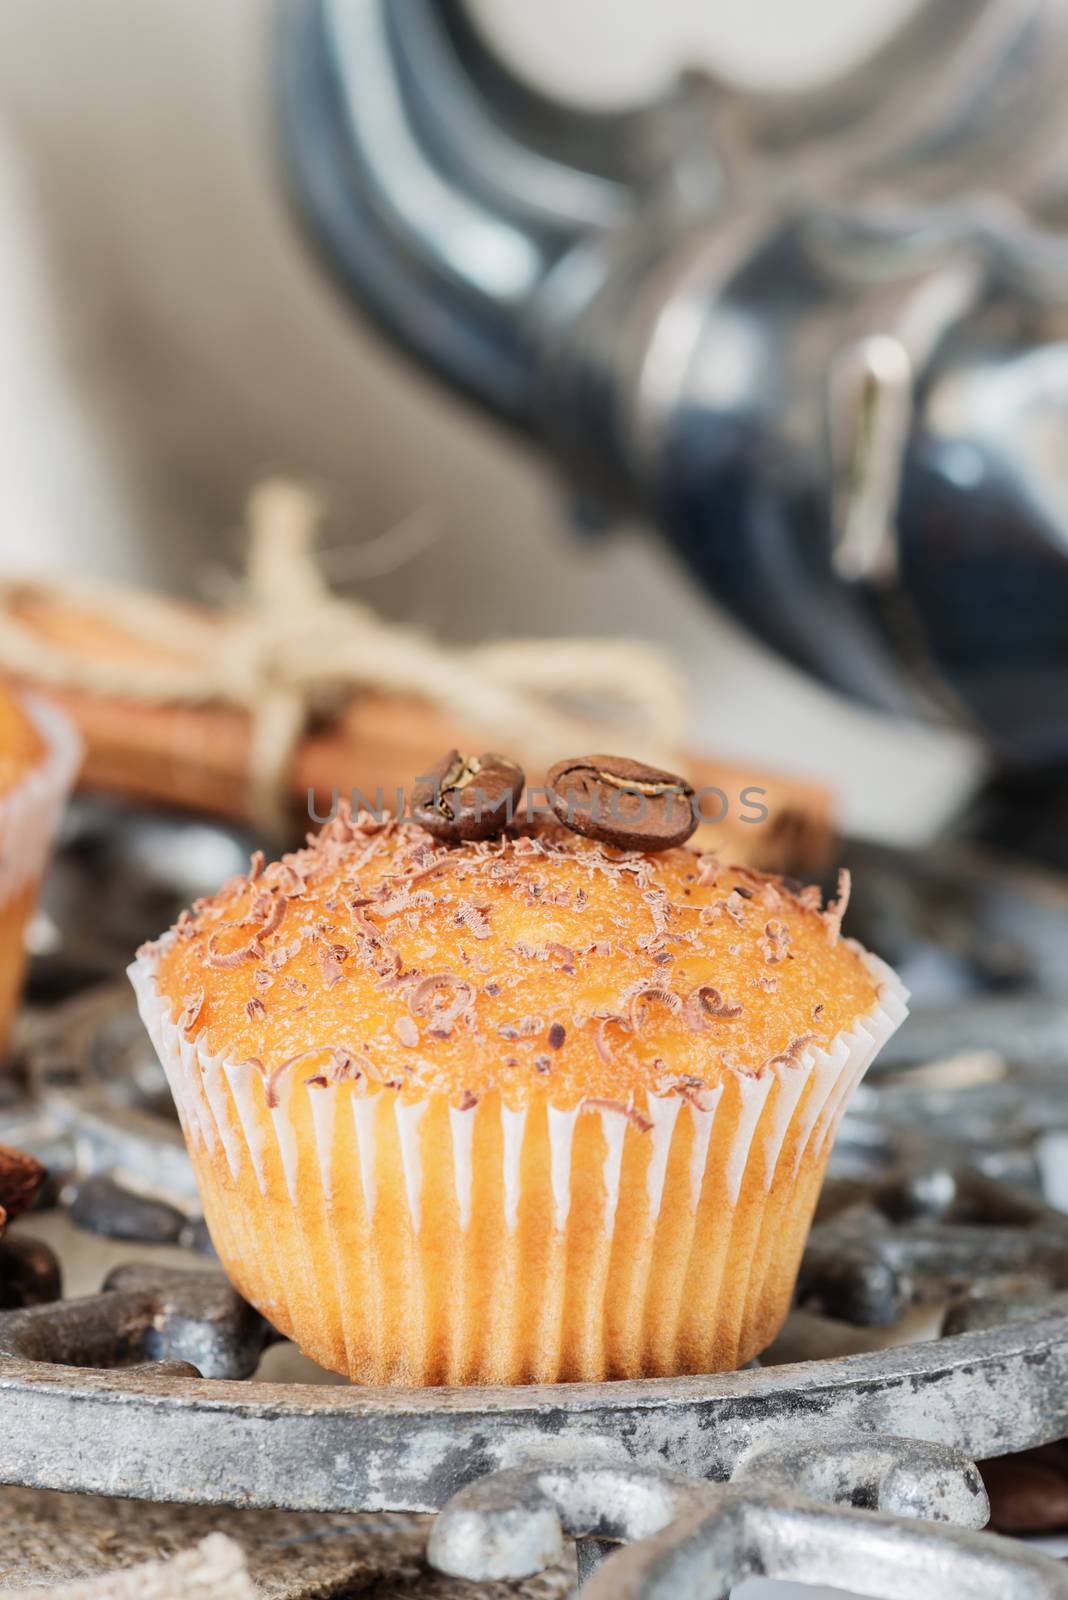 Cupcakes with chocolate shavings surrounded by coffee beans